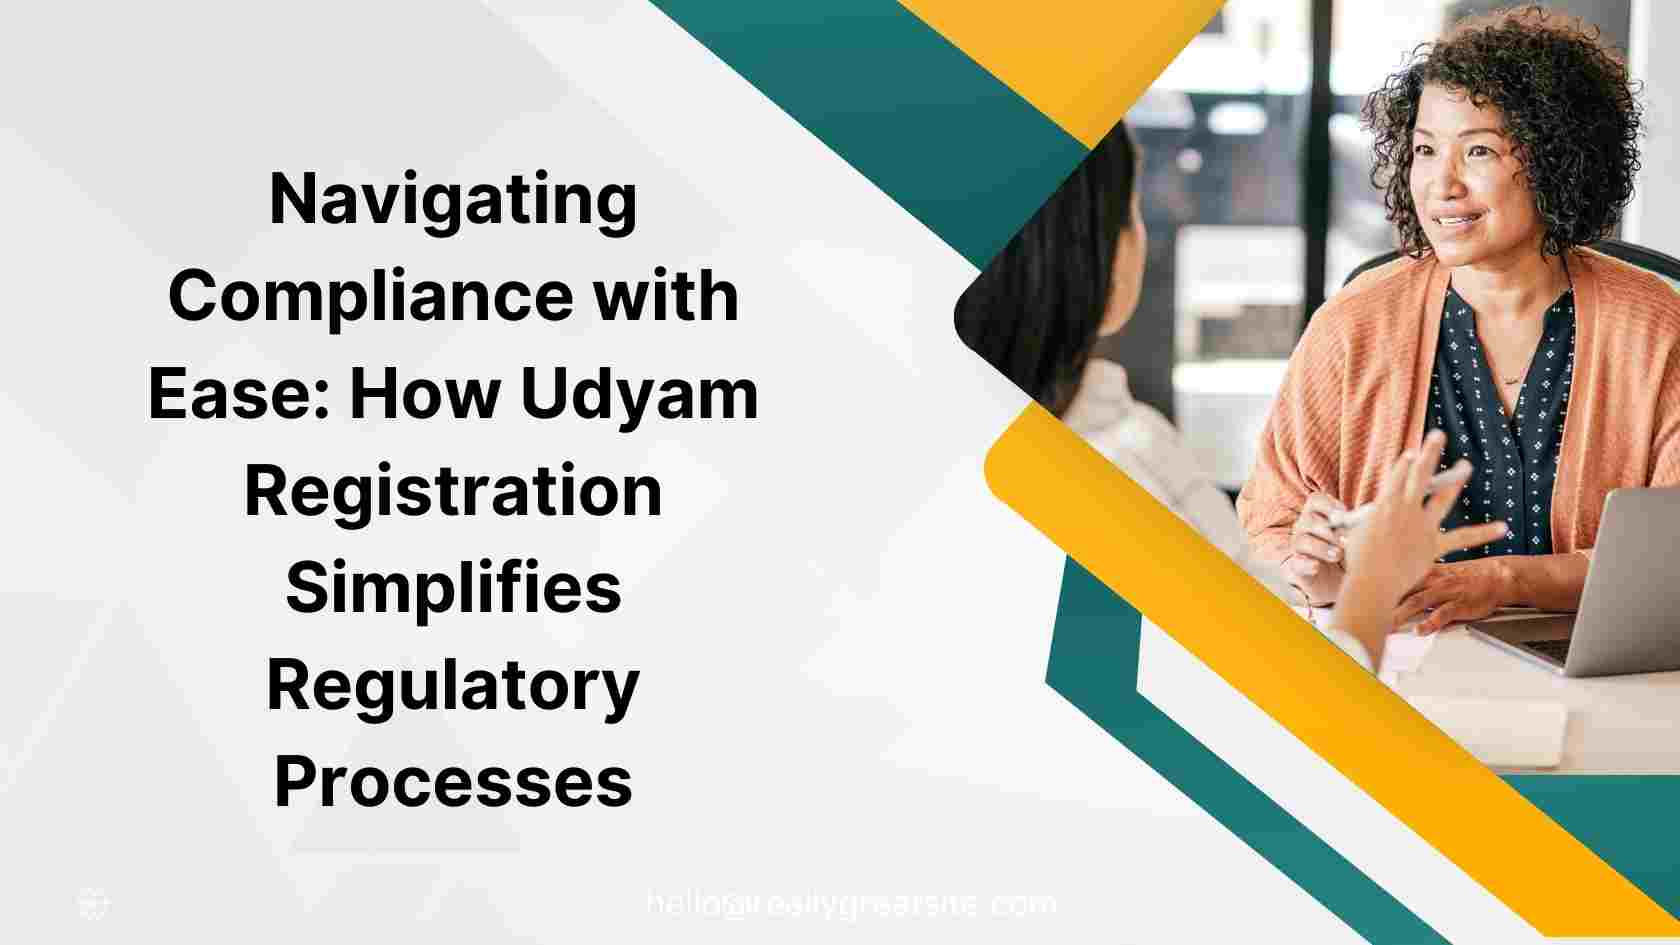 Navigating Compliance with Ease: How Udyam Registration Simplifies Regulatory Processes